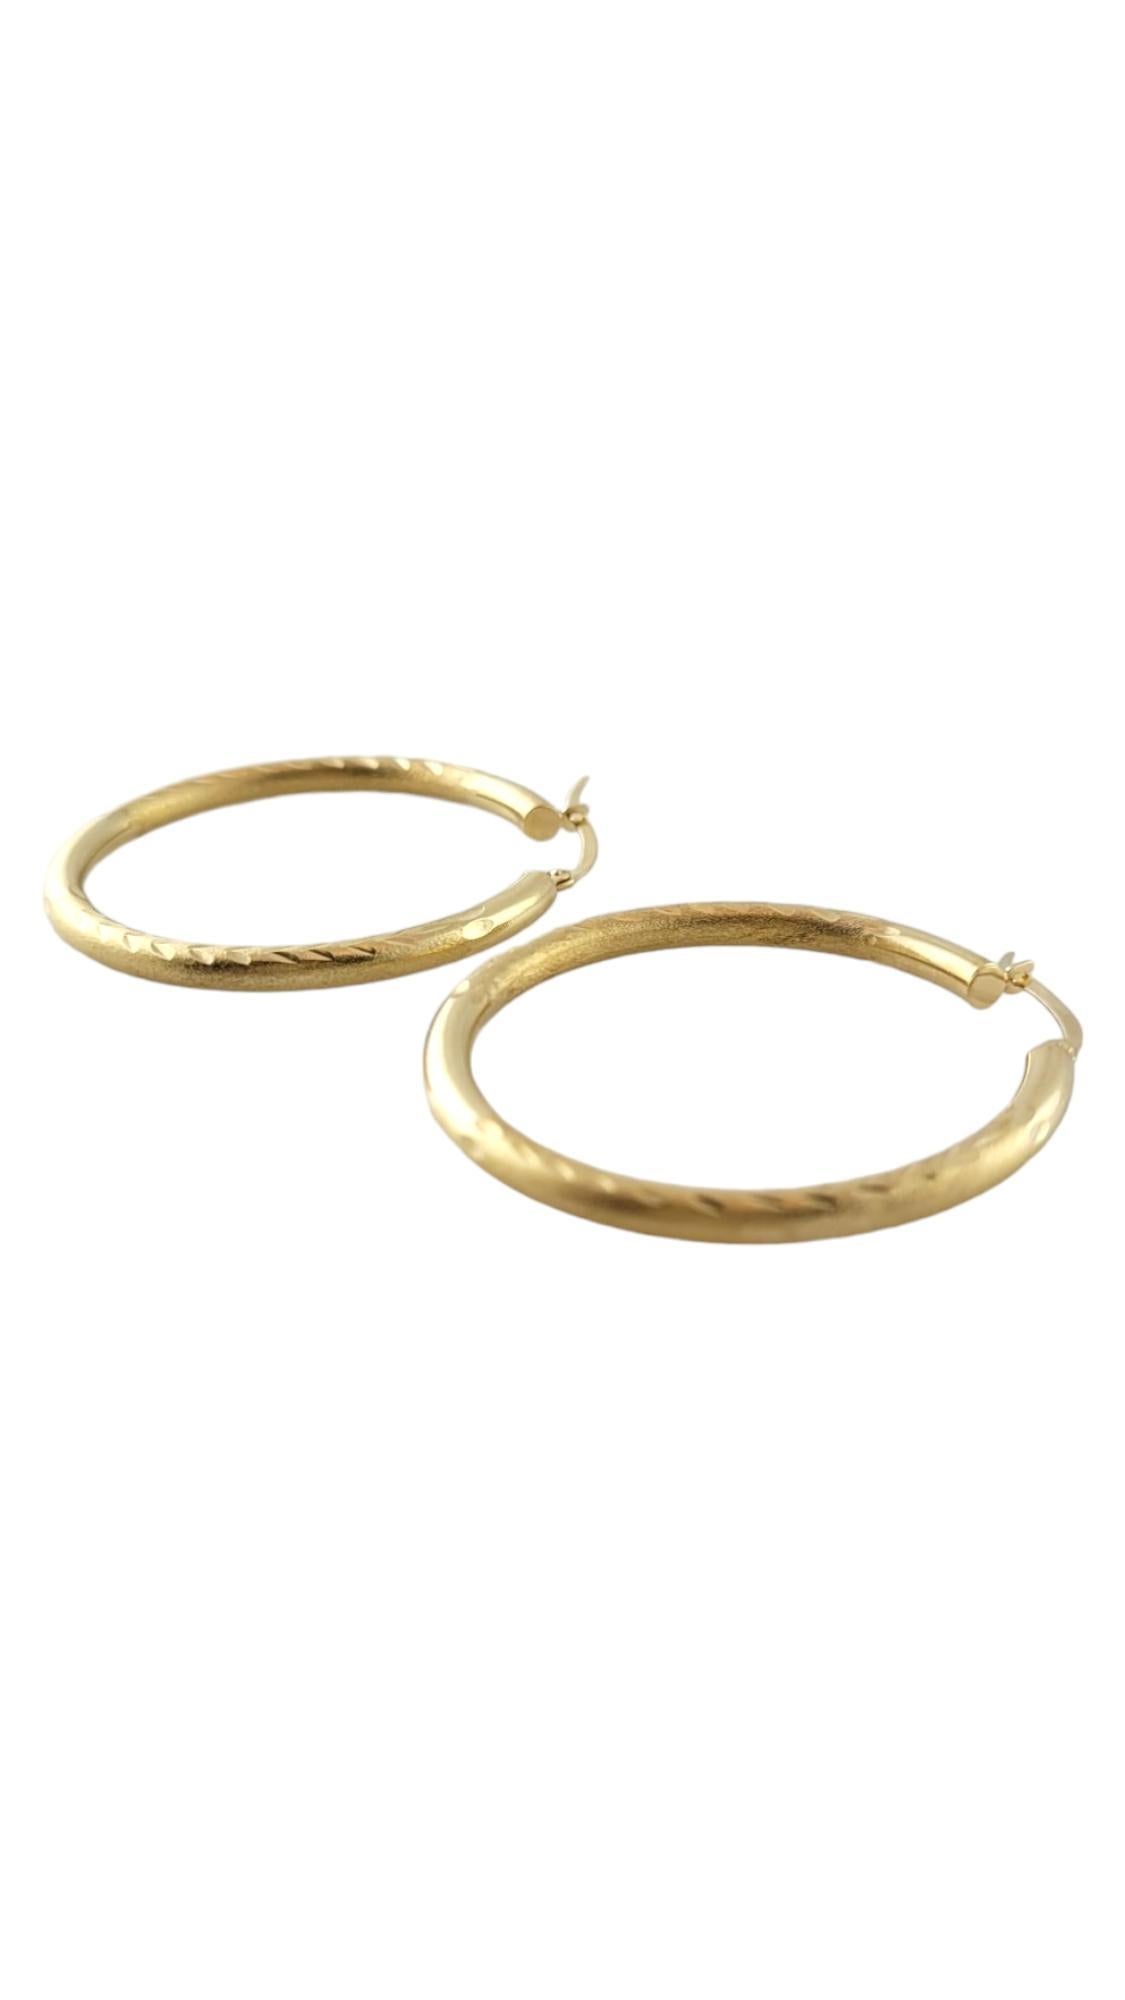 14K Yellow Gold Textured Large Circle Hoop Earrings #16864 In Good Condition For Sale In Washington Depot, CT